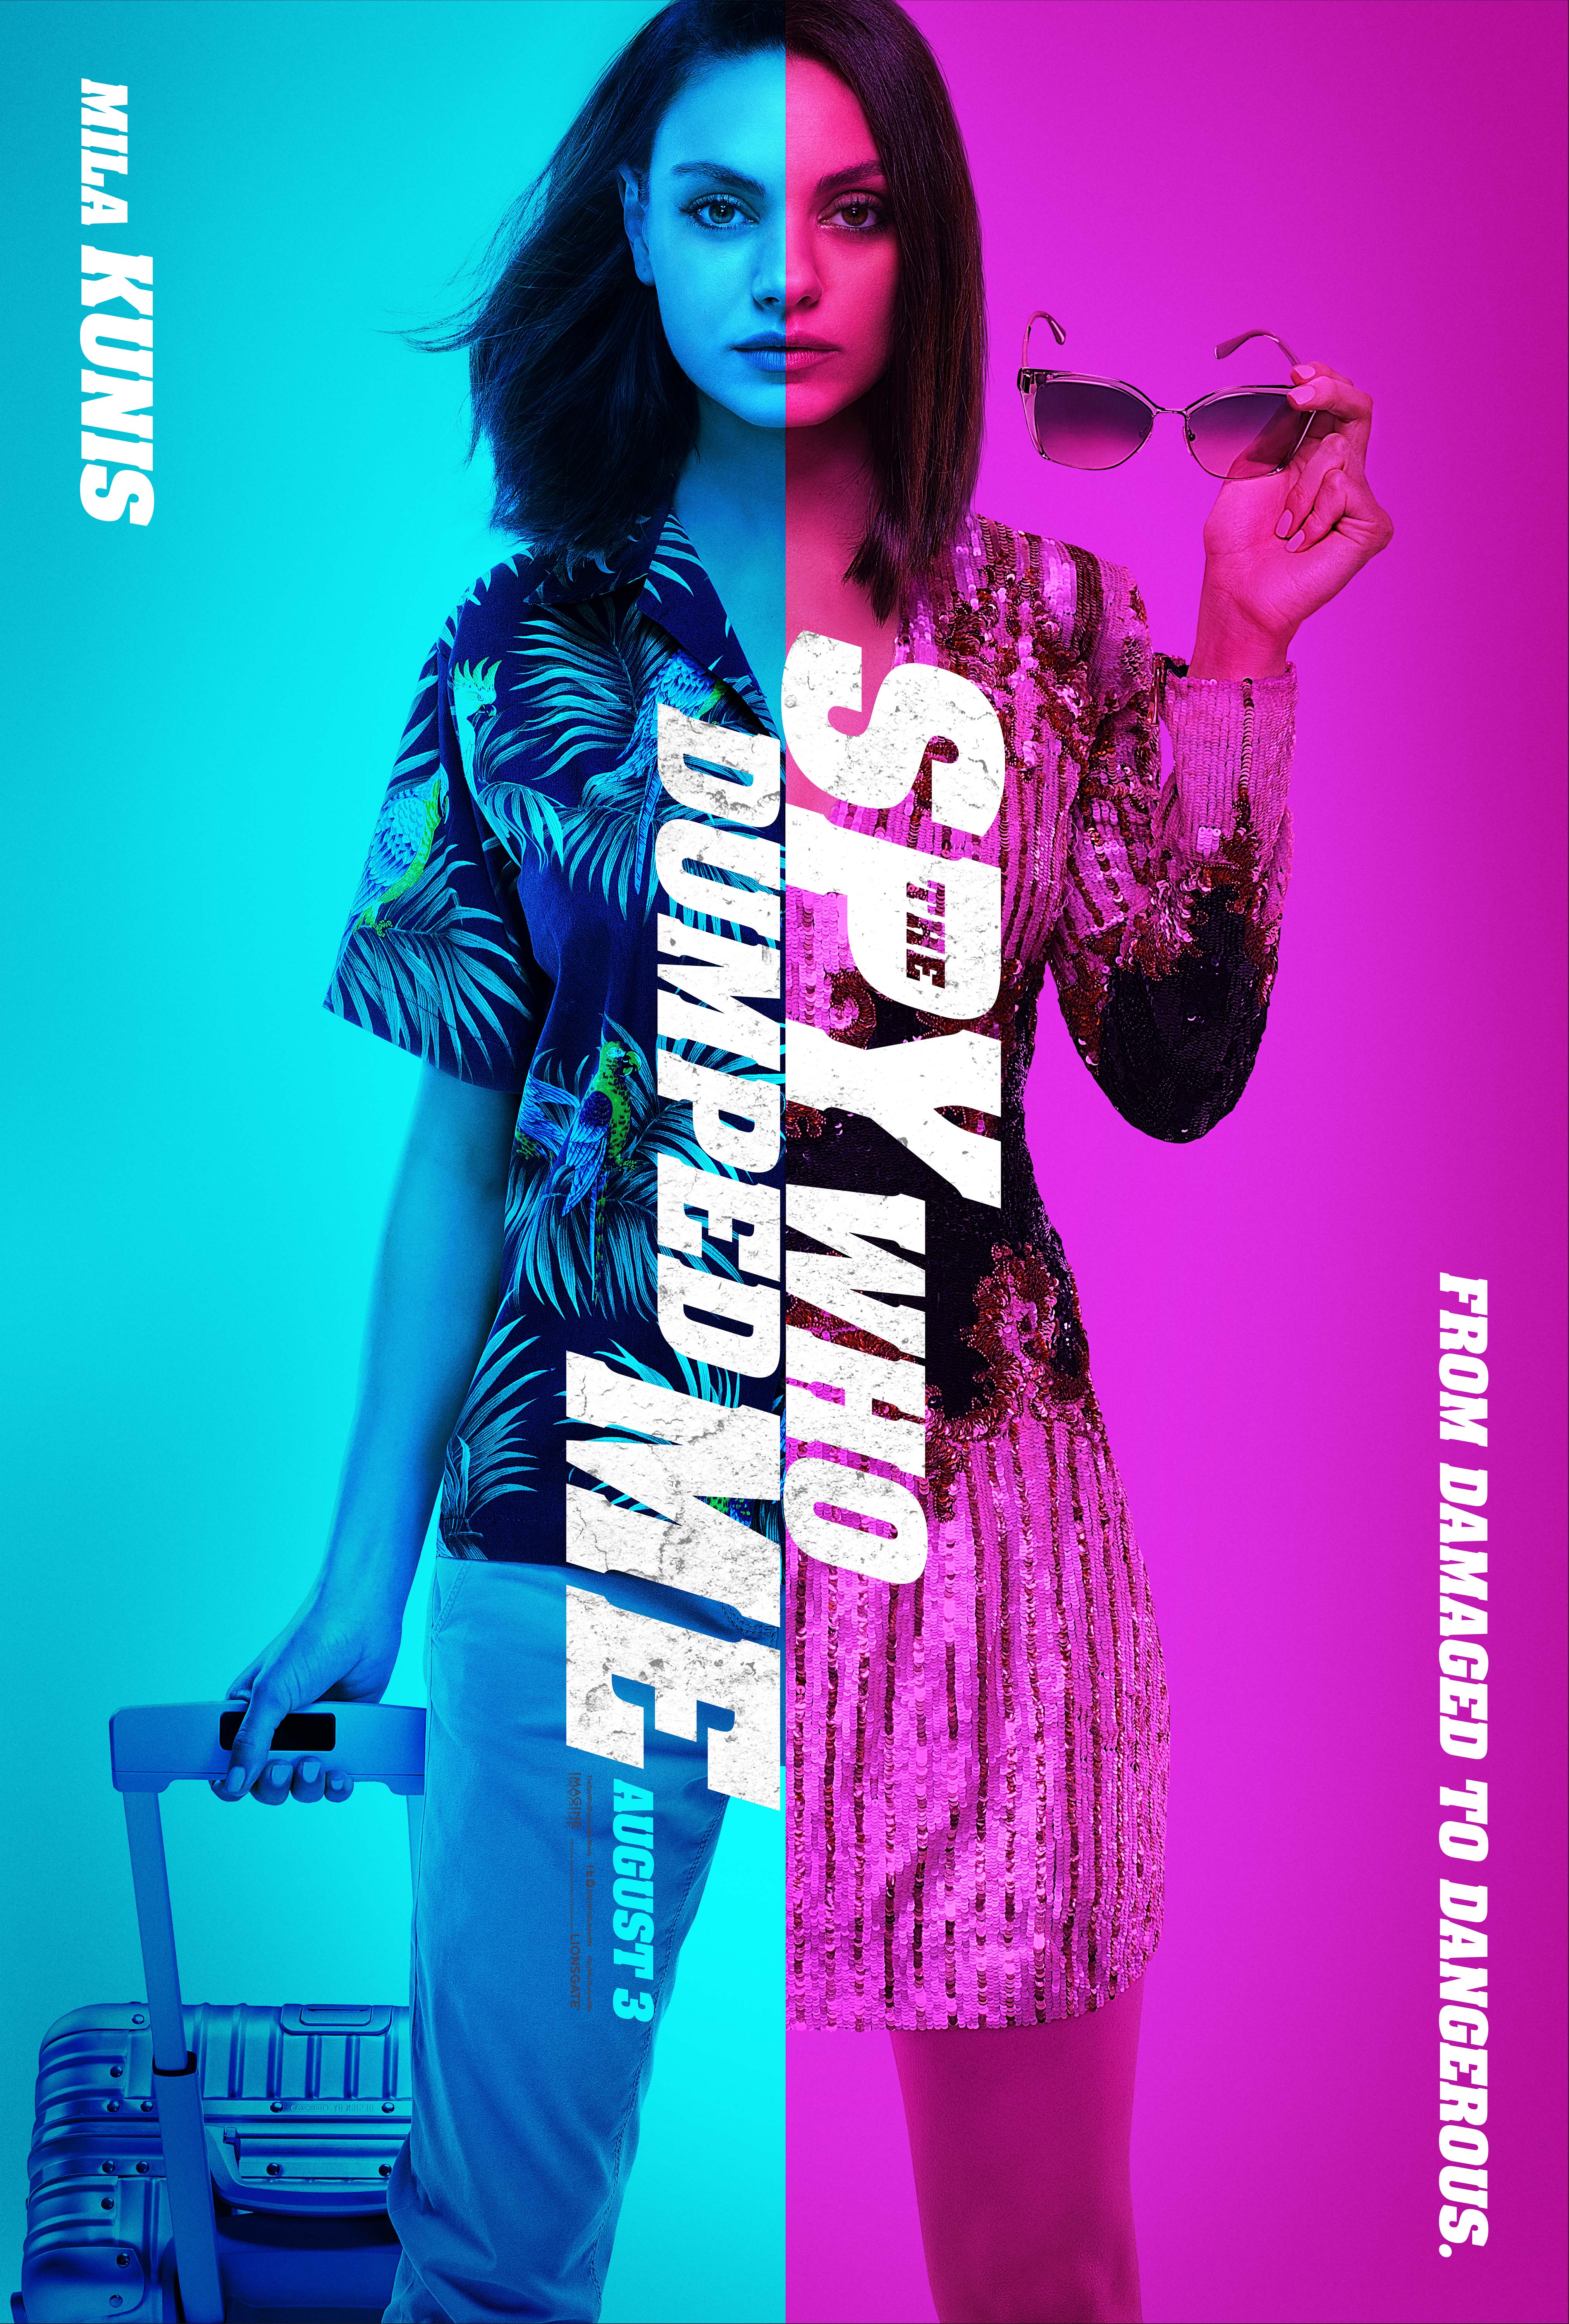 The Spy Who Dumped Me poster (Lionsgate)